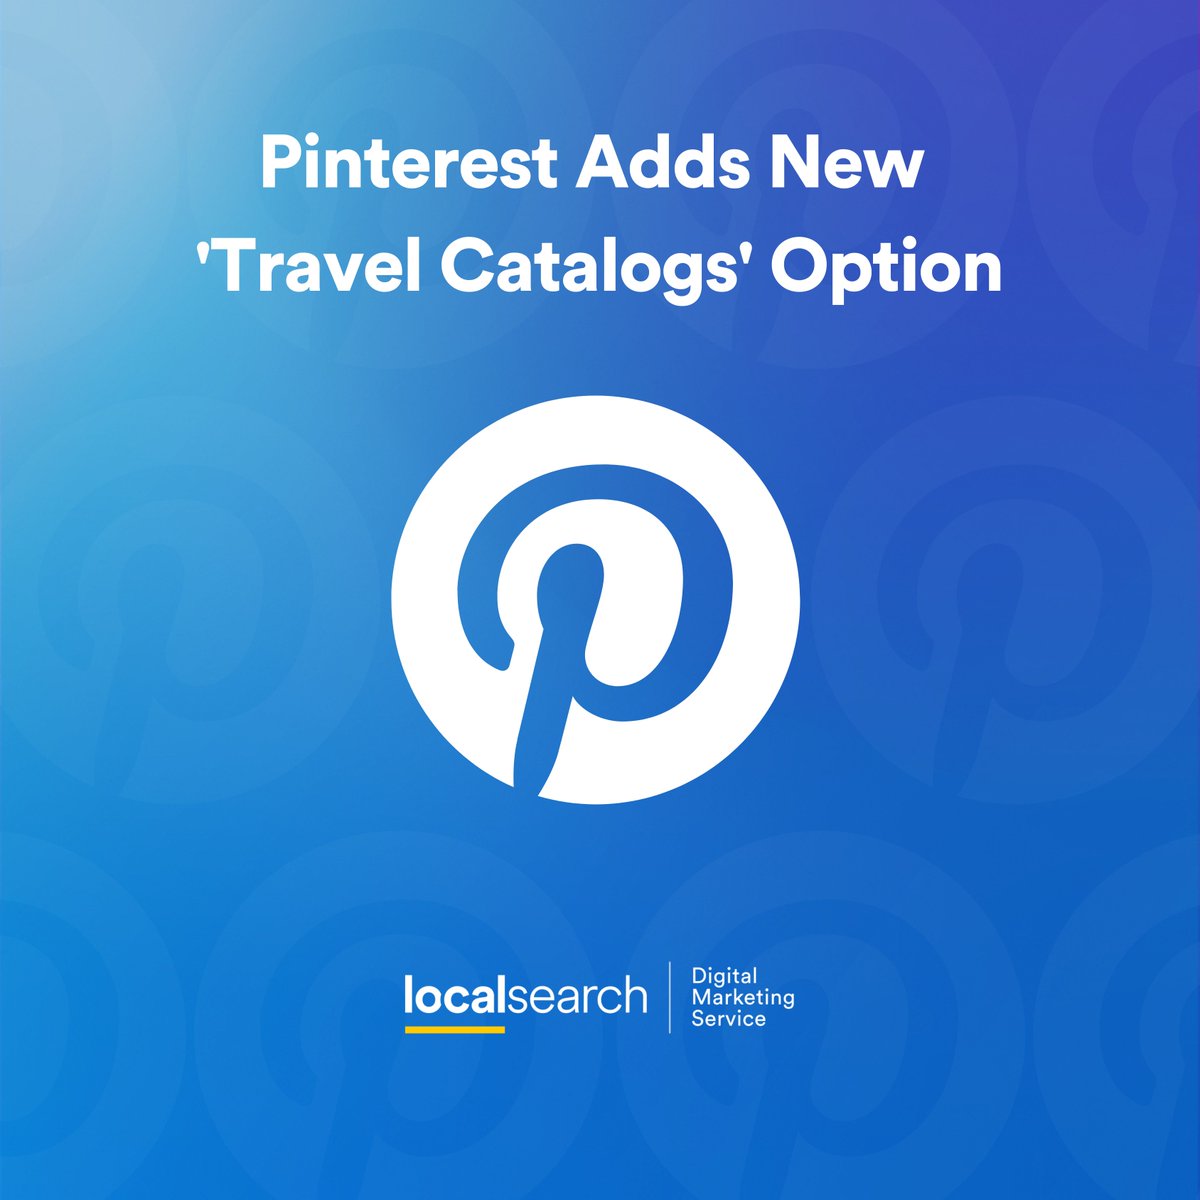 @Pinterest is launching a new 'Travel Catalogs' ad option, enabling hotel and rental brands to upload their full travel catalog. Pinterest’s system will then be able to create dynamic product ads to display to users.

#DigitalMarketing #BusinessTips